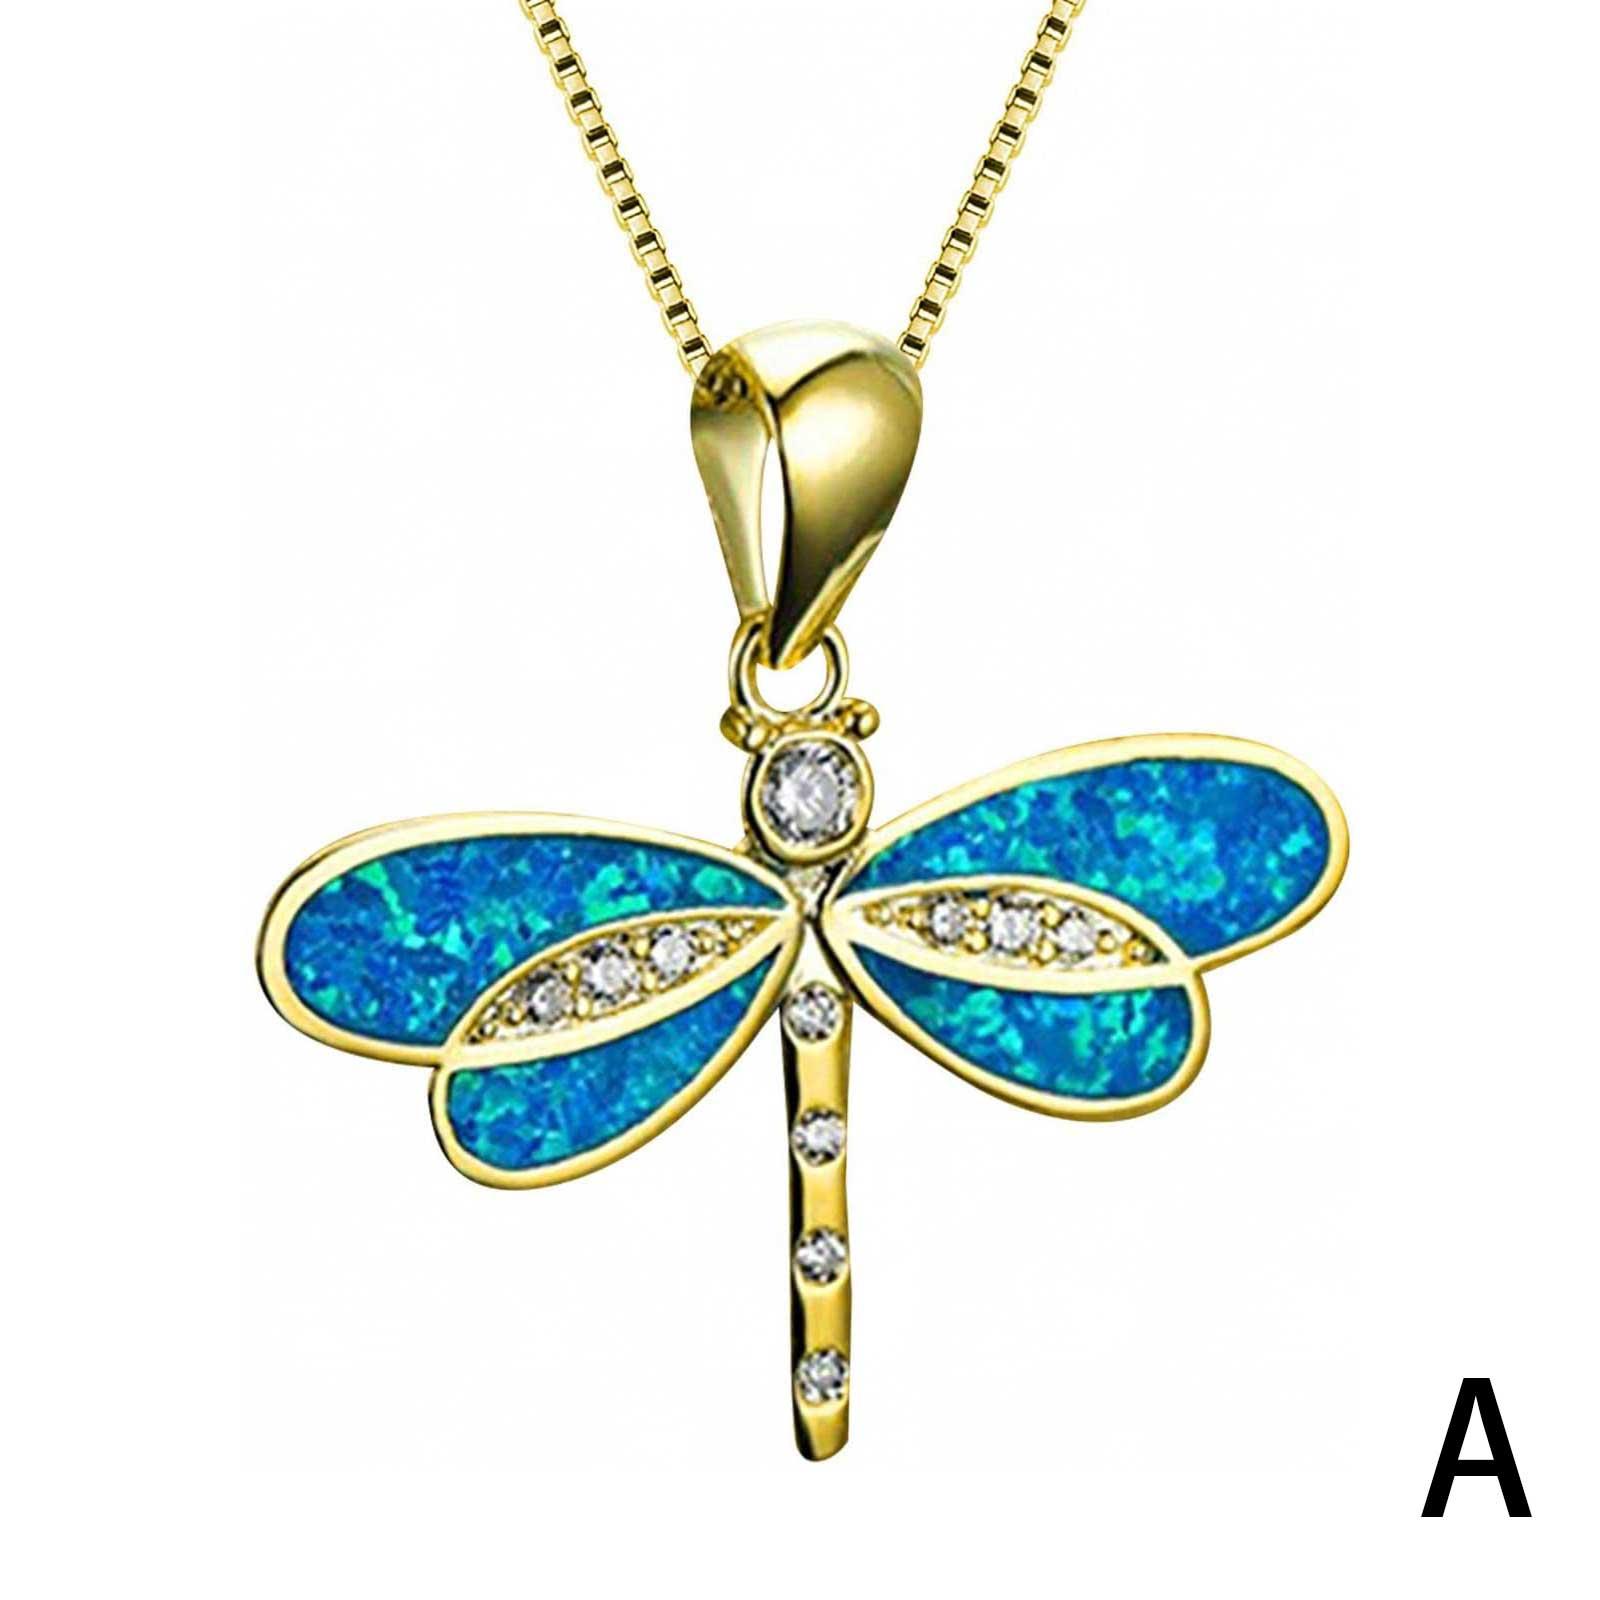 Dragonfly Necklace Pendant Choker For Women Girls White Gold Blue Silver Y5G3 - image 1 of 9